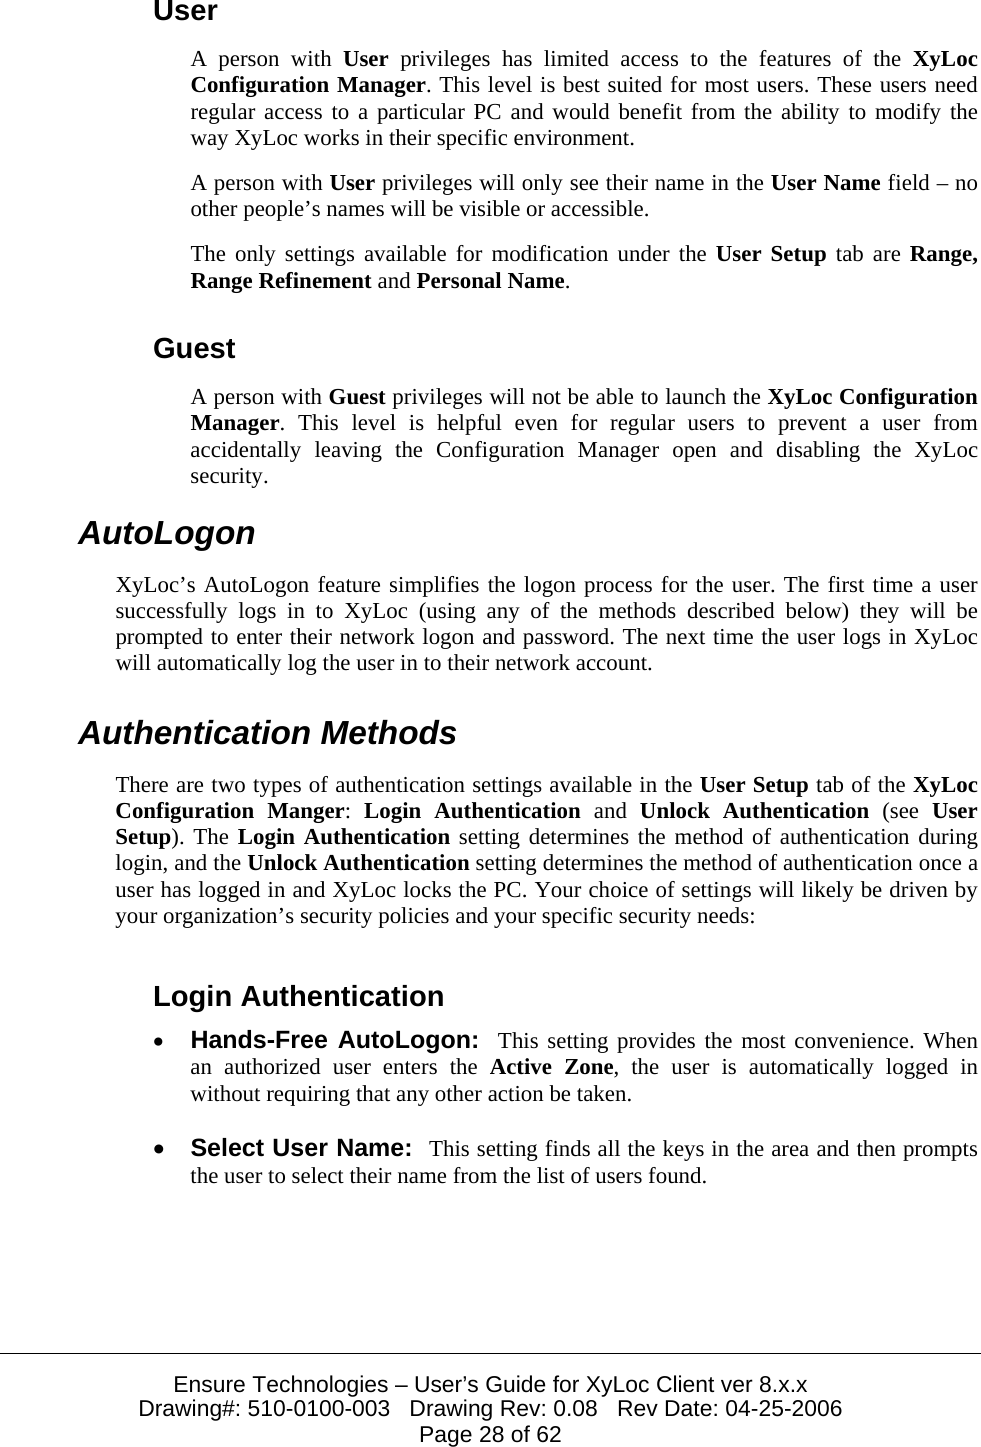  Ensure Technologies – User’s Guide for XyLoc Client ver 8.x.x Drawing#: 510-0100-003   Drawing Rev: 0.08   Rev Date: 04-25-2006 Page 28 of 62 User A person with User privileges has limited access to the features of the XyLoc Configuration Manager. This level is best suited for most users. These users need regular access to a particular PC and would benefit from the ability to modify the way XyLoc works in their specific environment. A person with User privileges will only see their name in the User Name field – no other people’s names will be visible or accessible. The only settings available for modification under the User Setup tab are Range, Range Refinement and Personal Name. Guest A person with Guest privileges will not be able to launch the XyLoc Configuration Manager. This level is helpful even for regular users to prevent a user from accidentally leaving the Configuration Manager open and disabling the XyLoc security. AutoLogon XyLoc’s AutoLogon feature simplifies the logon process for the user. The first time a user successfully logs in to XyLoc (using any of the methods described below) they will be prompted to enter their network logon and password. The next time the user logs in XyLoc will automatically log the user in to their network account. Authentication Methods There are two types of authentication settings available in the User Setup tab of the XyLoc Configuration Manger:  Login Authentication and  Unlock Authentication (see User Setup). The Login Authentication setting determines the method of authentication during login, and the Unlock Authentication setting determines the method of authentication once a user has logged in and XyLoc locks the PC. Your choice of settings will likely be driven by your organization’s security policies and your specific security needs: Login Authentication • Hands-Free AutoLogon:  This setting provides the most convenience. When an authorized user enters the Active Zone, the user is automatically logged in without requiring that any other action be taken. • Select User Name:  This setting finds all the keys in the area and then prompts the user to select their name from the list of users found.  